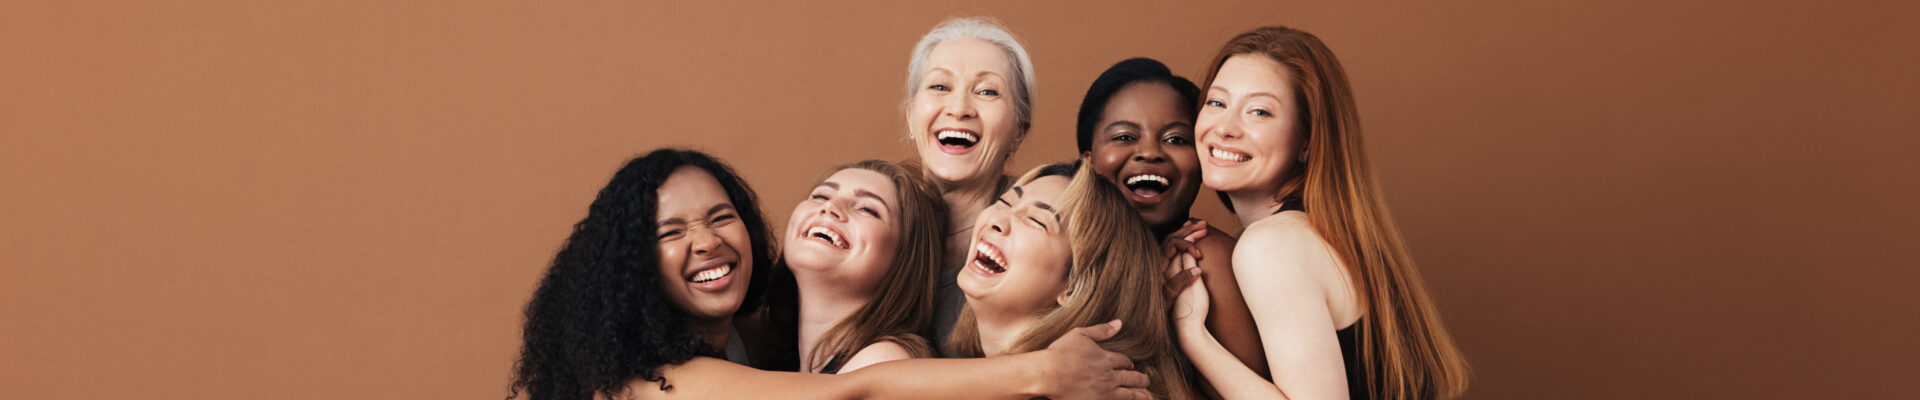 group of women laughing